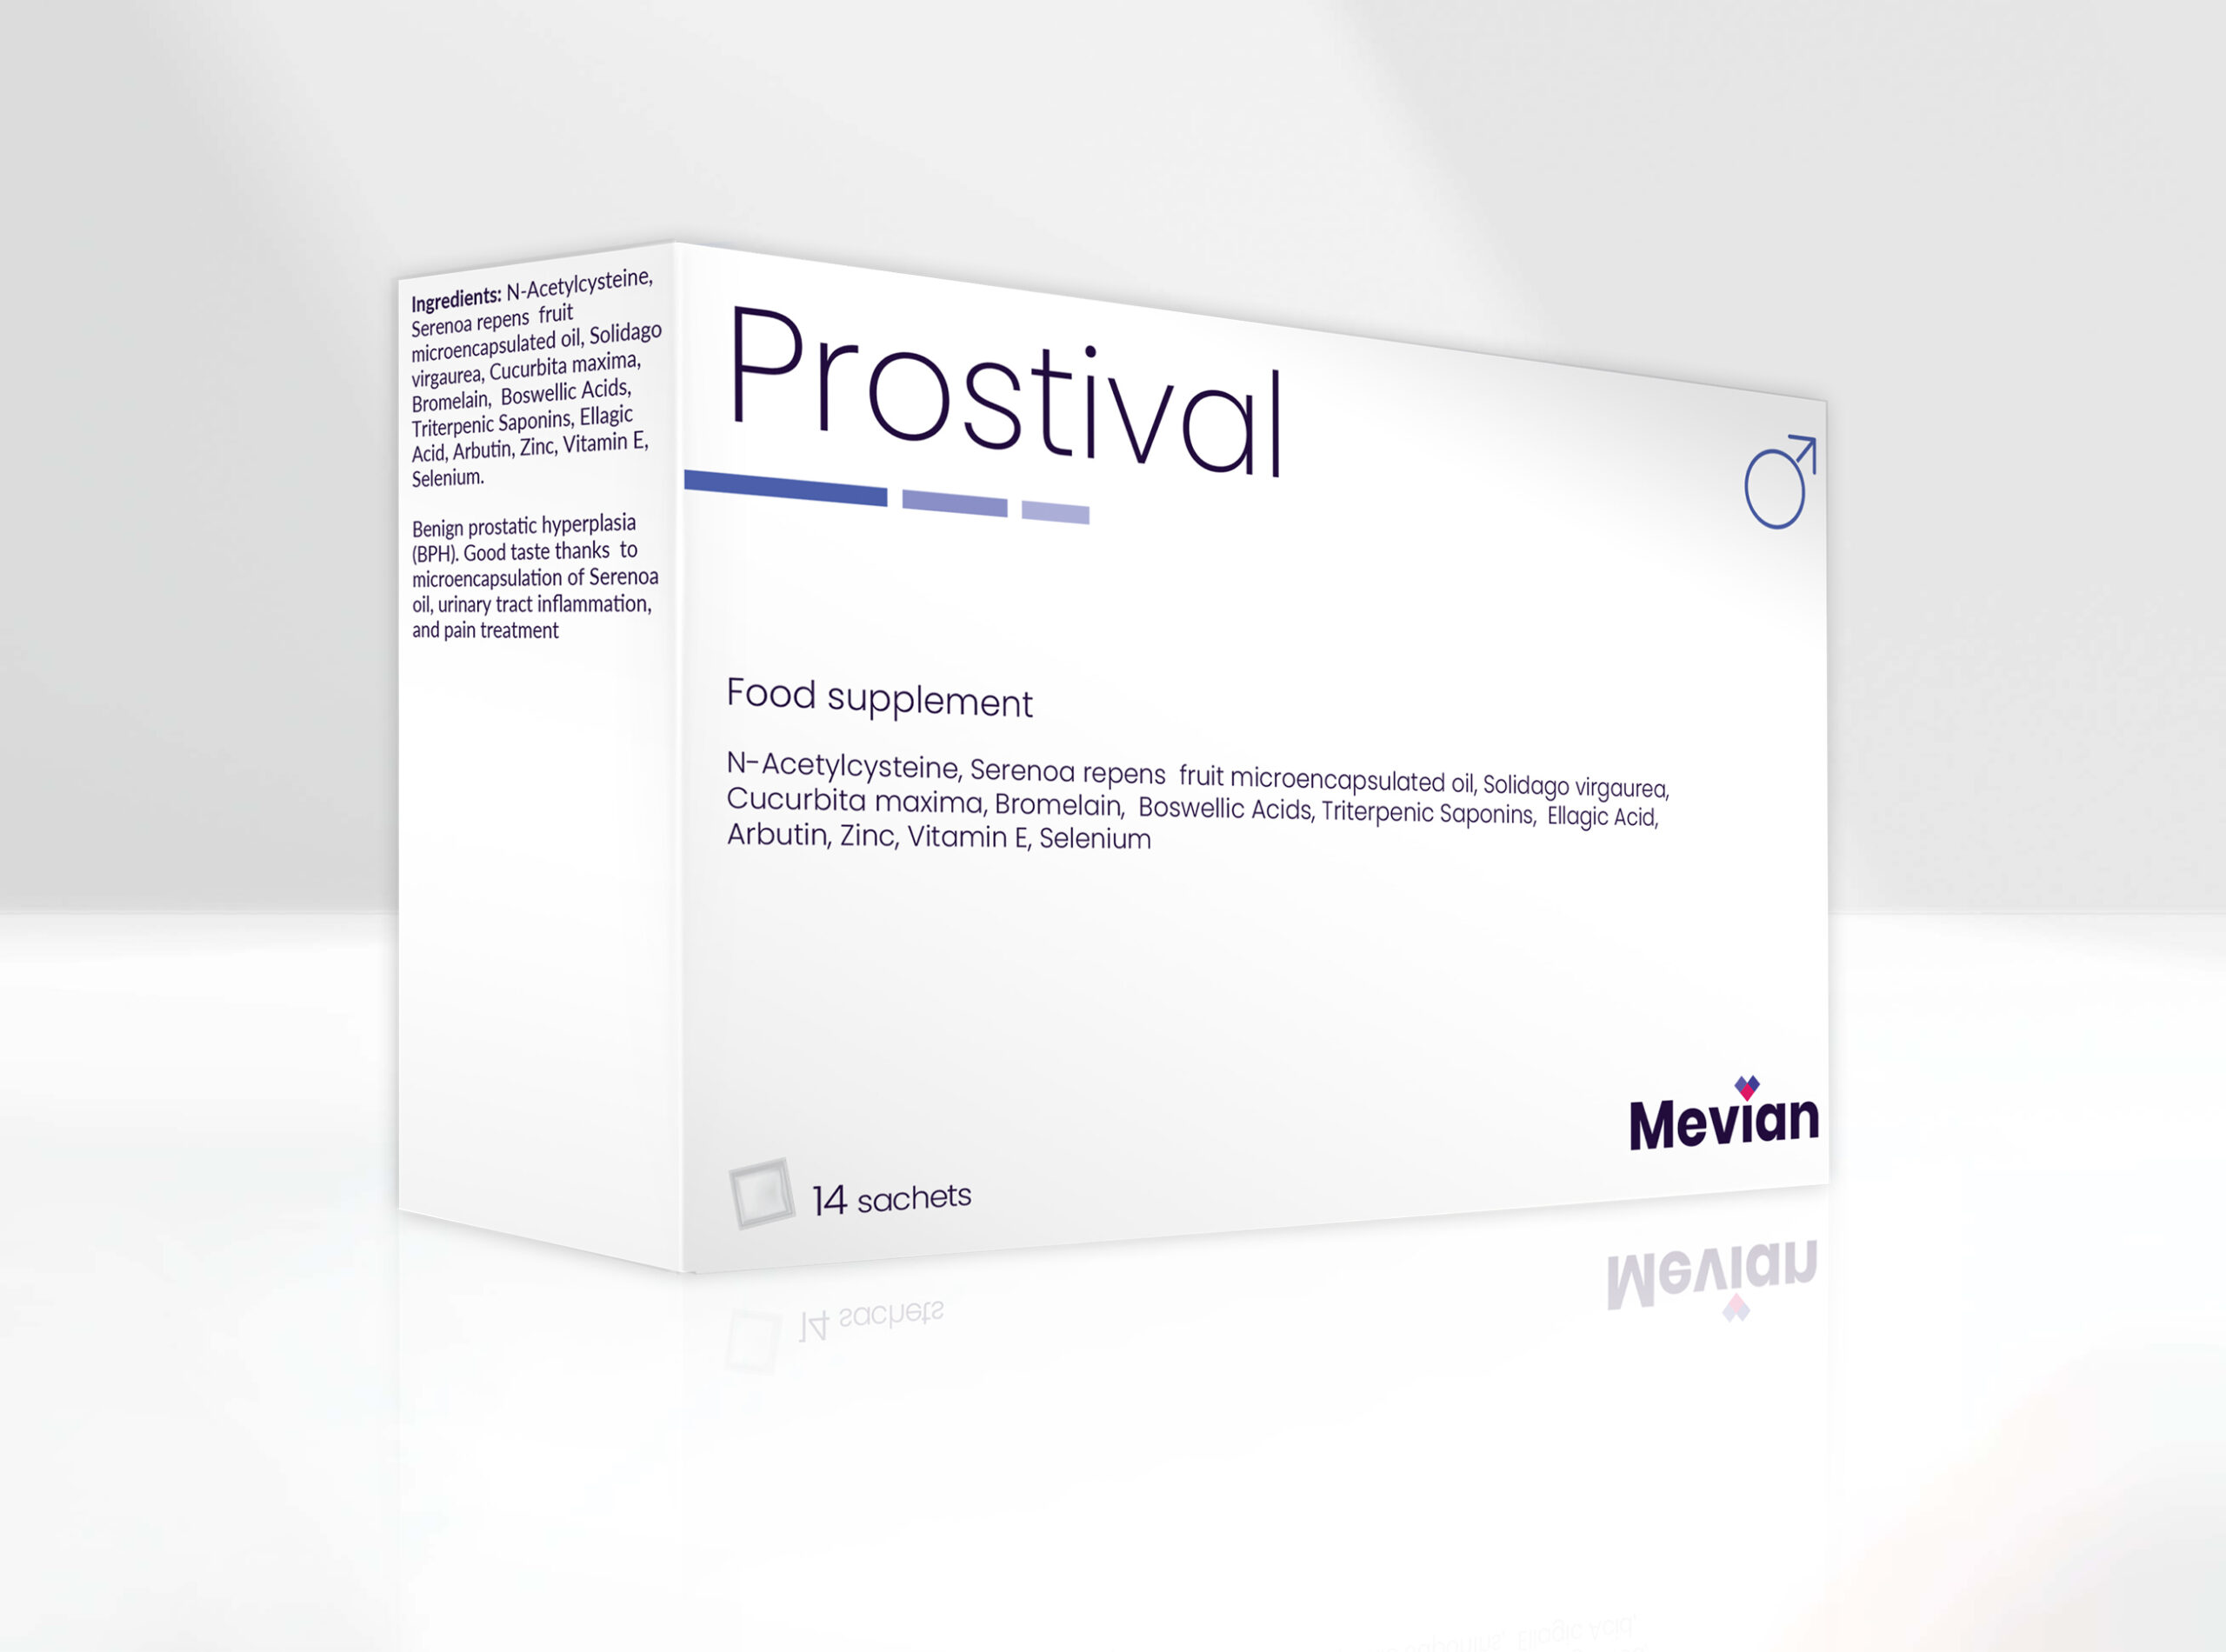 Prostival is ideal for Benign prostatic hyperplasia (BPH), delivers an excellent taste thanks to the Serenoa oil, which decreases urinary tract inflammation and is useful for pain treatment.